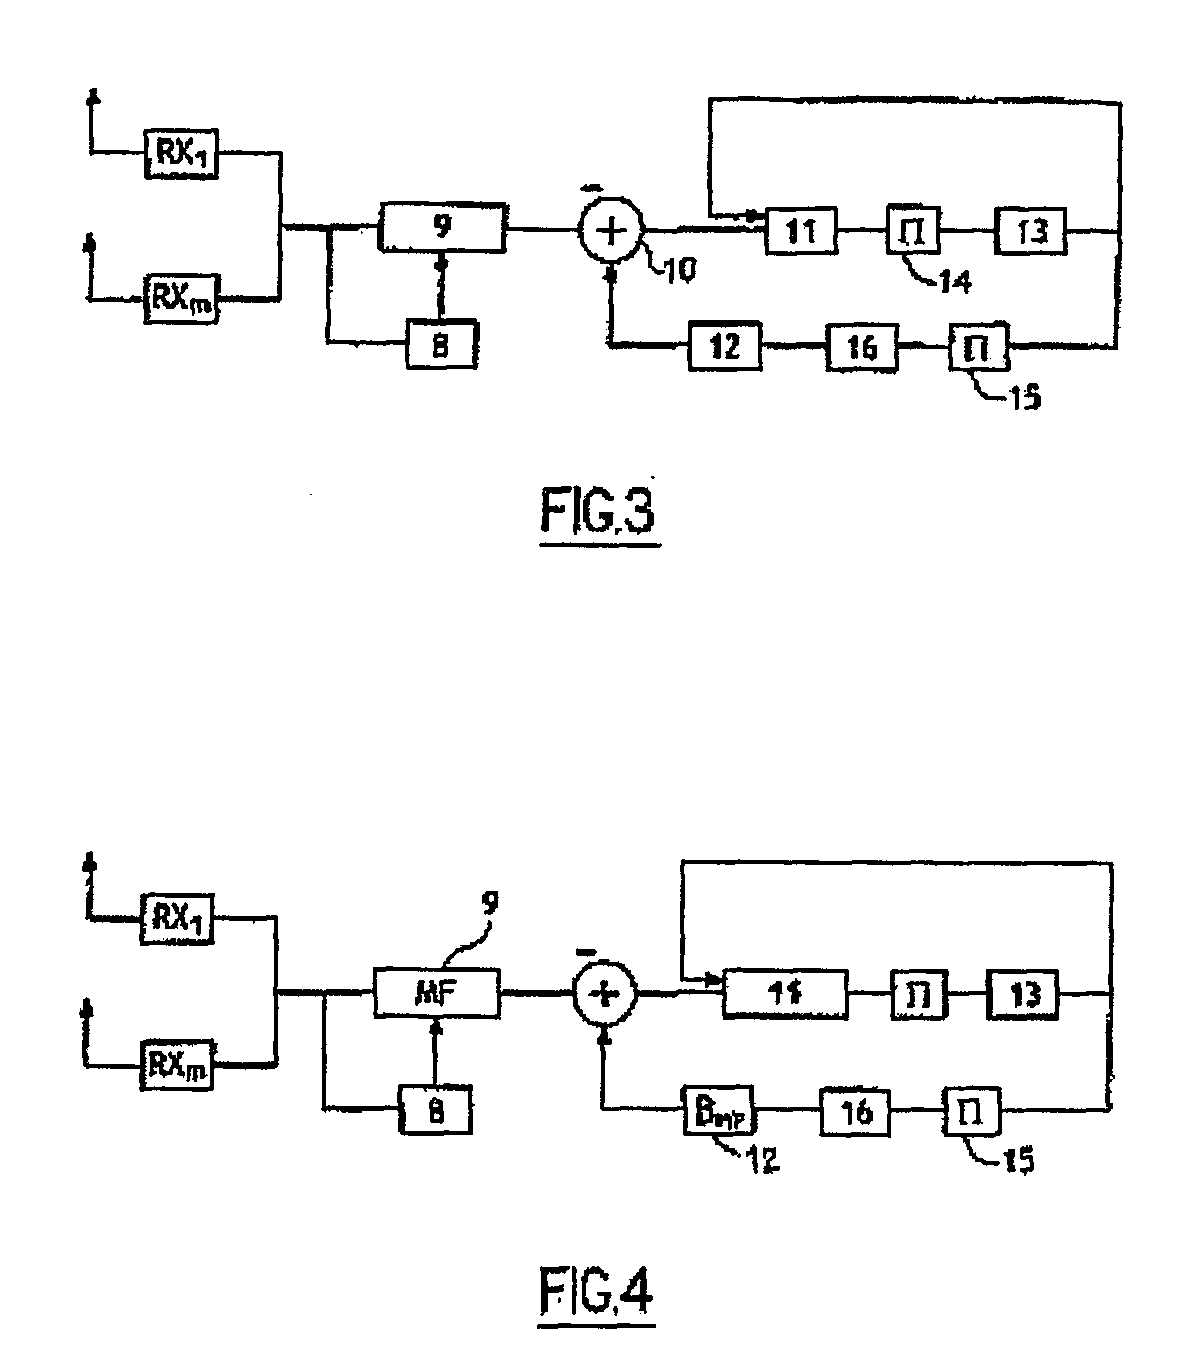 Iterative decoding and equalingzing method for hgih speed communications on multiple antenna channels during transmission and reception